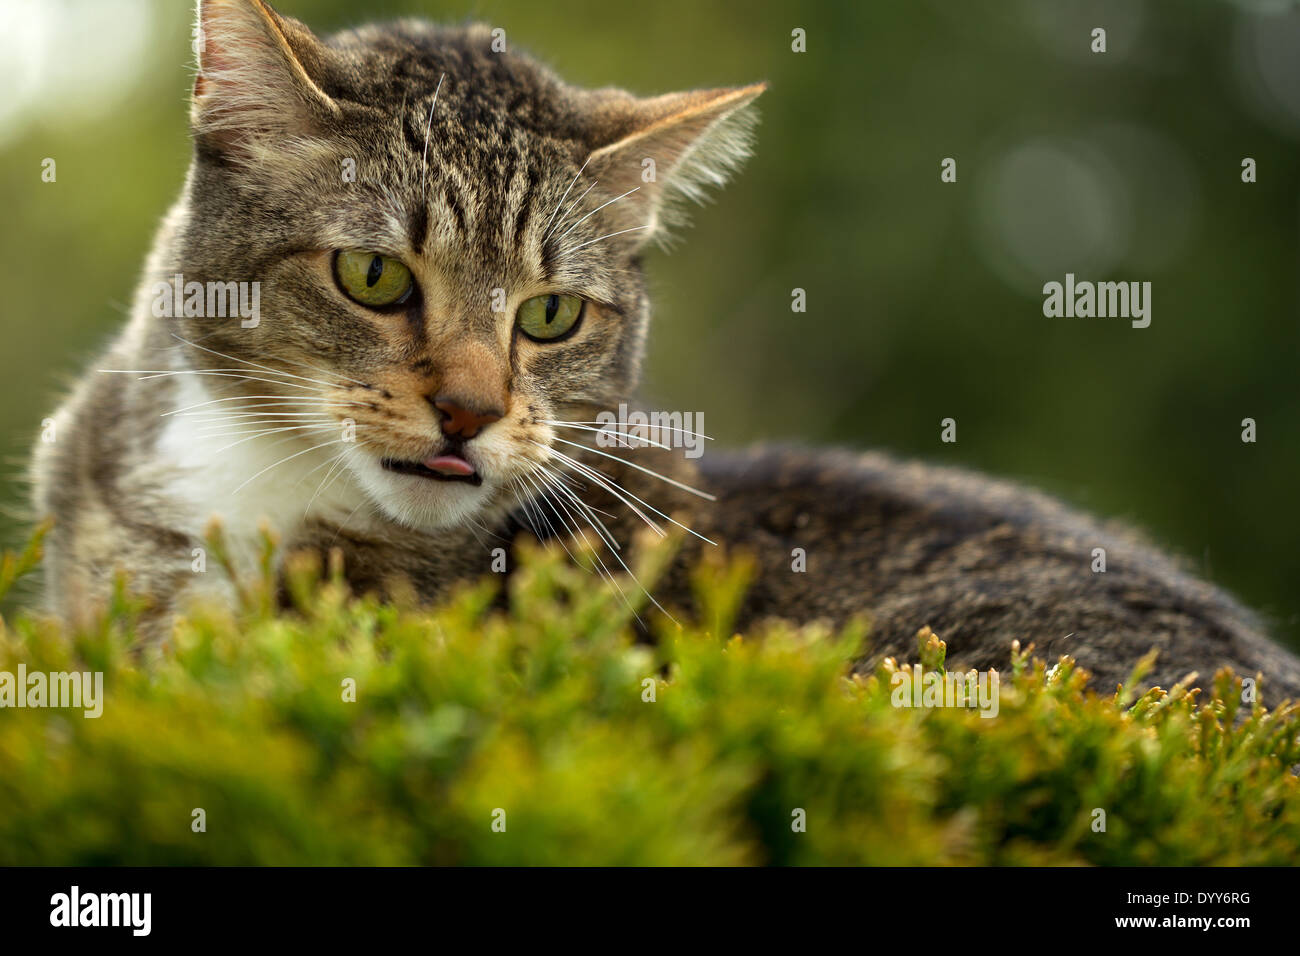 Horizontal photo of cat face, with tongue sticking out, outdoors on top of evergreen bush and blurred out trees in background Stock Photo